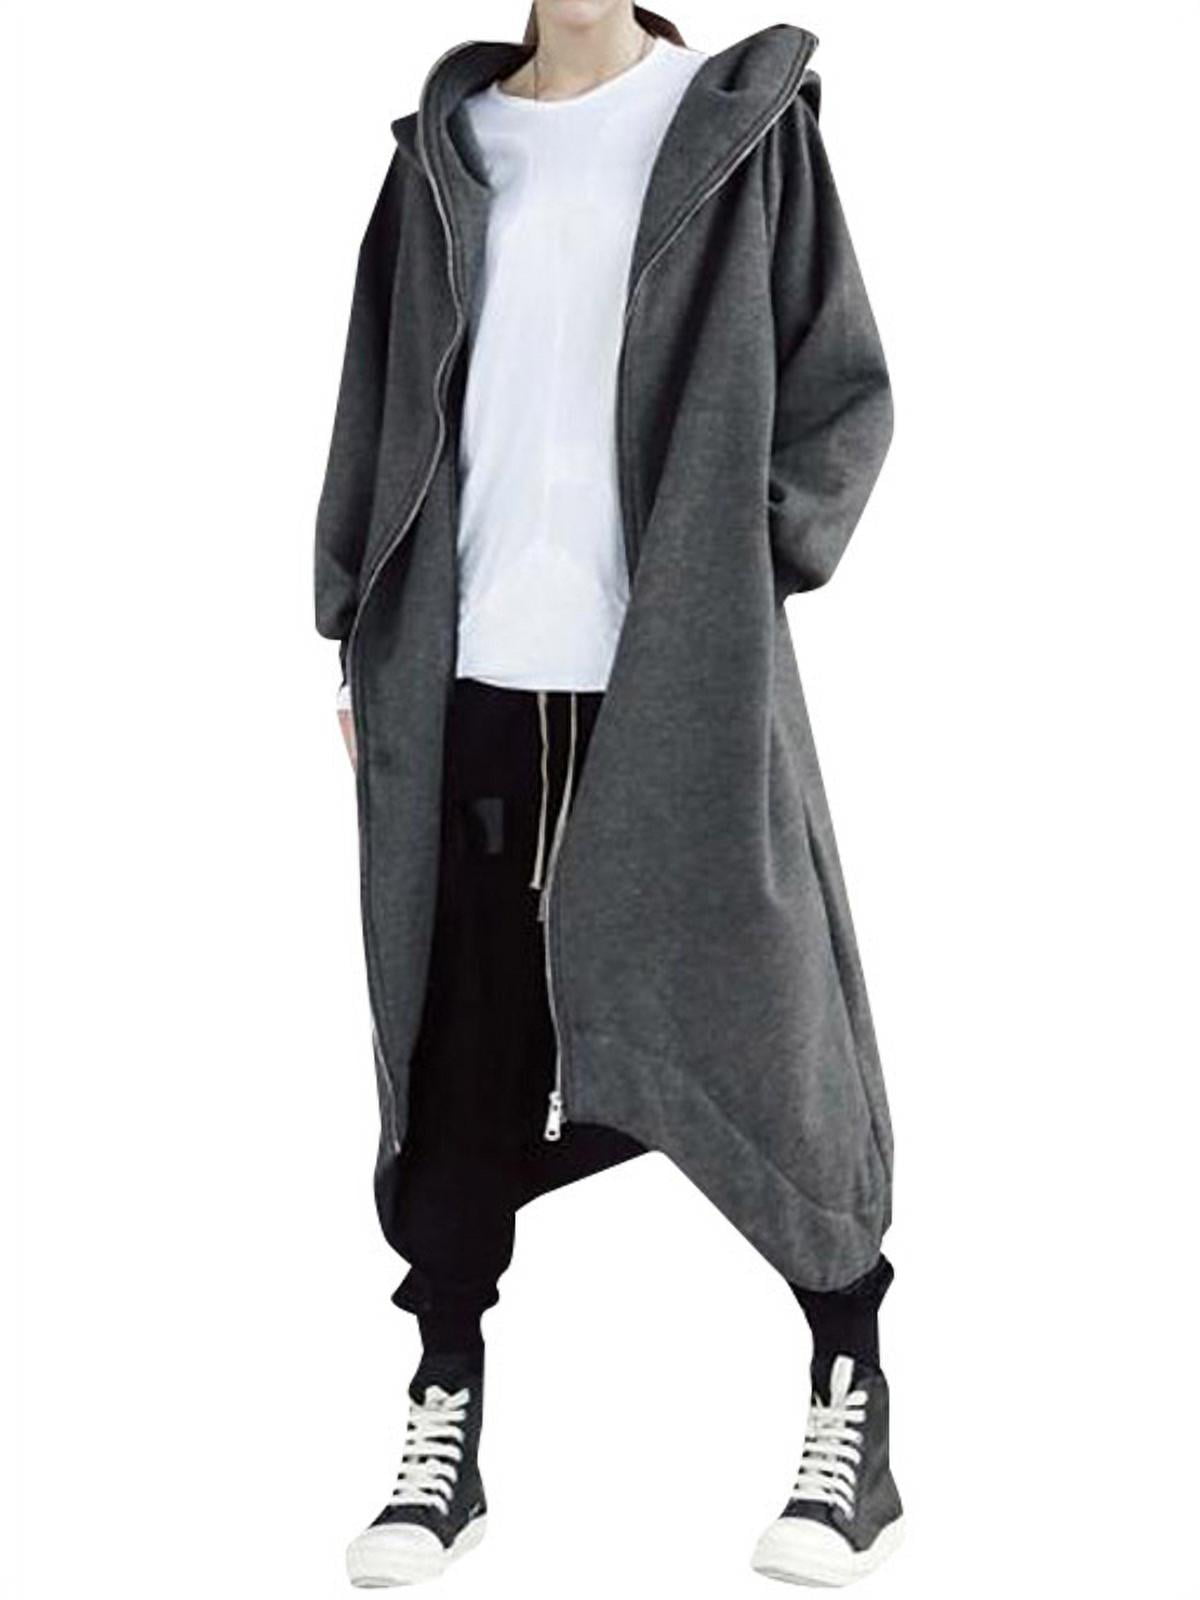 Women Solid Color Casual Loose Sweatshirts Zipper Hoodie Coat Long Jacket Outerwear with Pockets Size L Black 